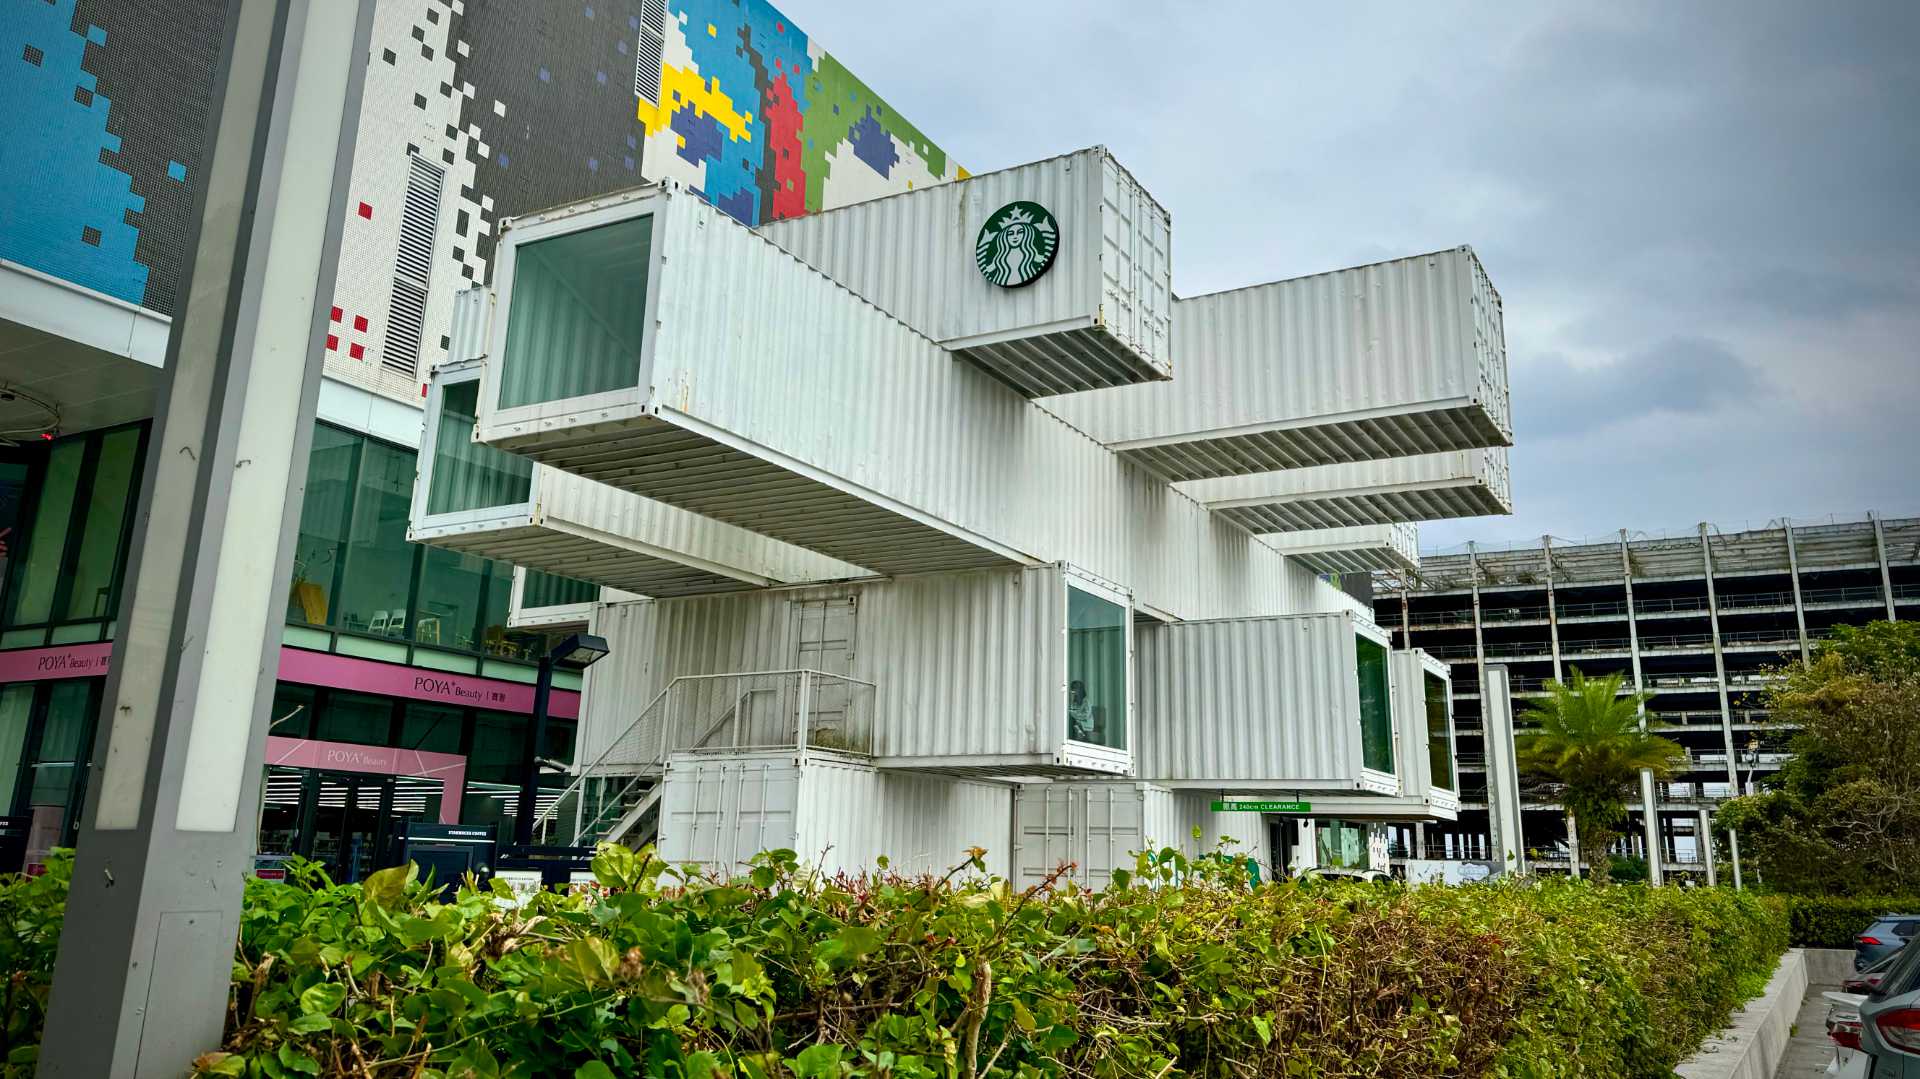 A Starbucks building made of four stories of stacked shipping containers projecting outwards at right angles.